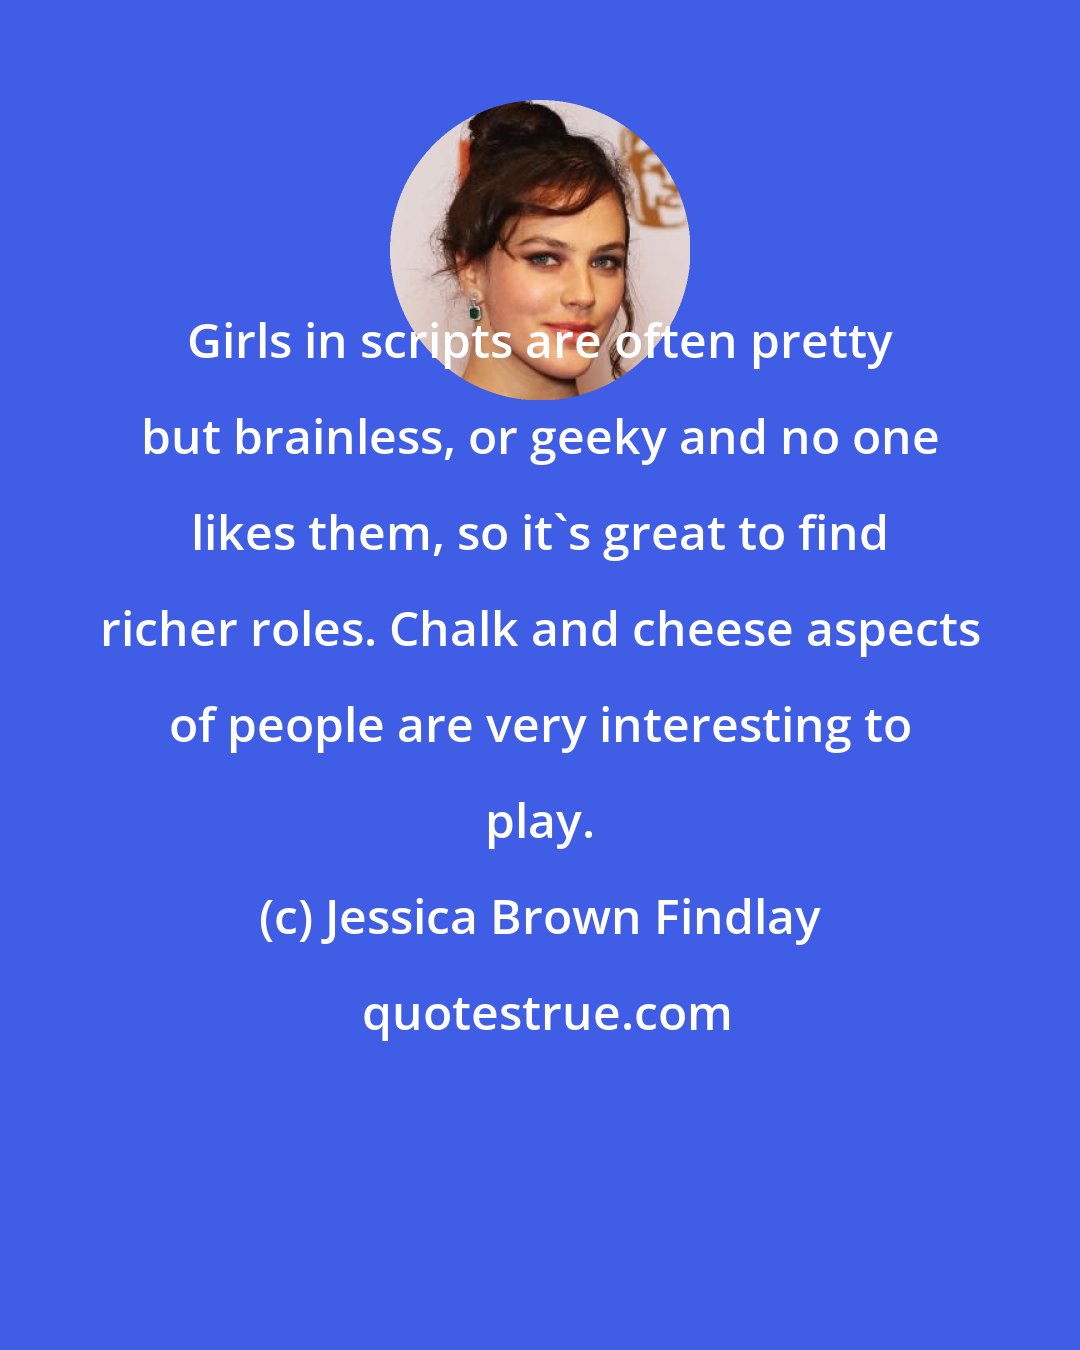 Jessica Brown Findlay: Girls in scripts are often pretty but brainless, or geeky and no one likes them, so it's great to find richer roles. Chalk and cheese aspects of people are very interesting to play.